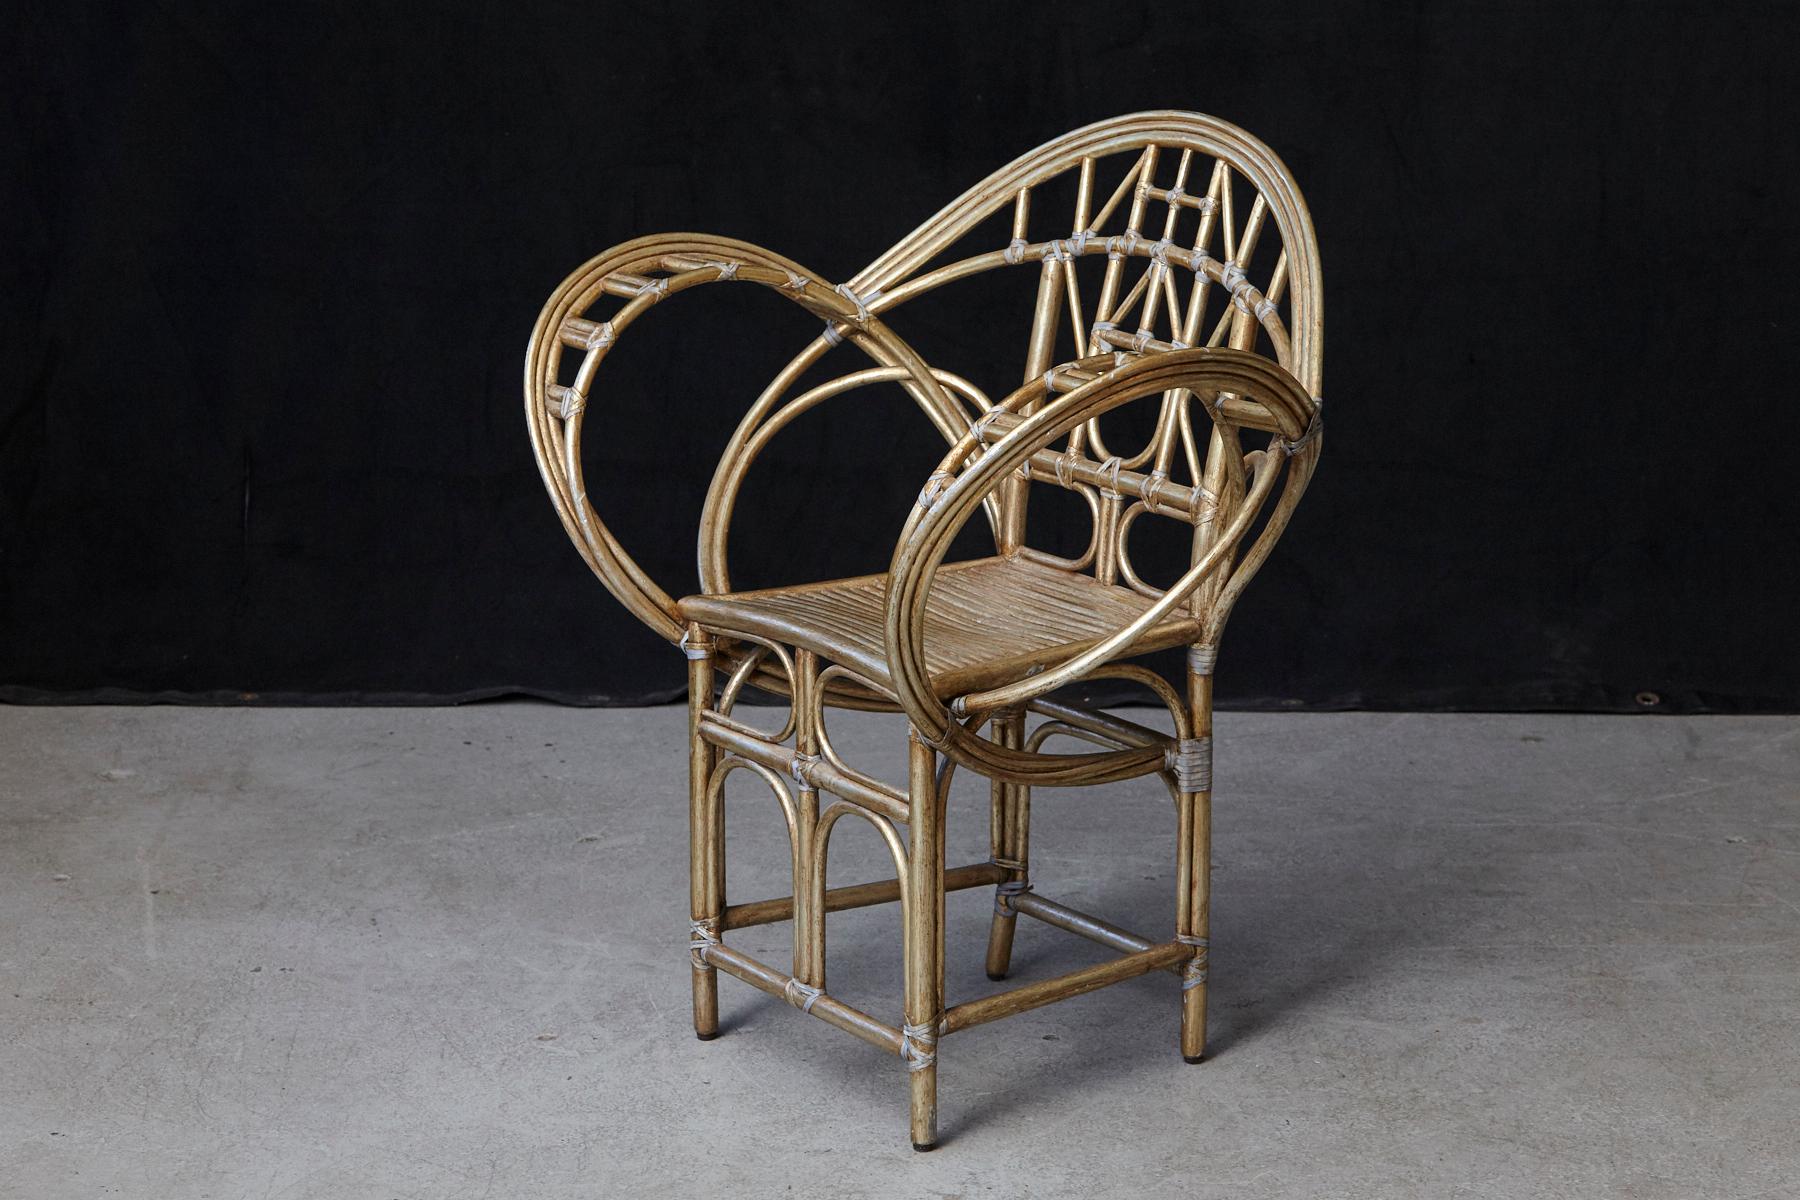 American McGuire Butterfly Chair, M-131 in Gold Tone Finish